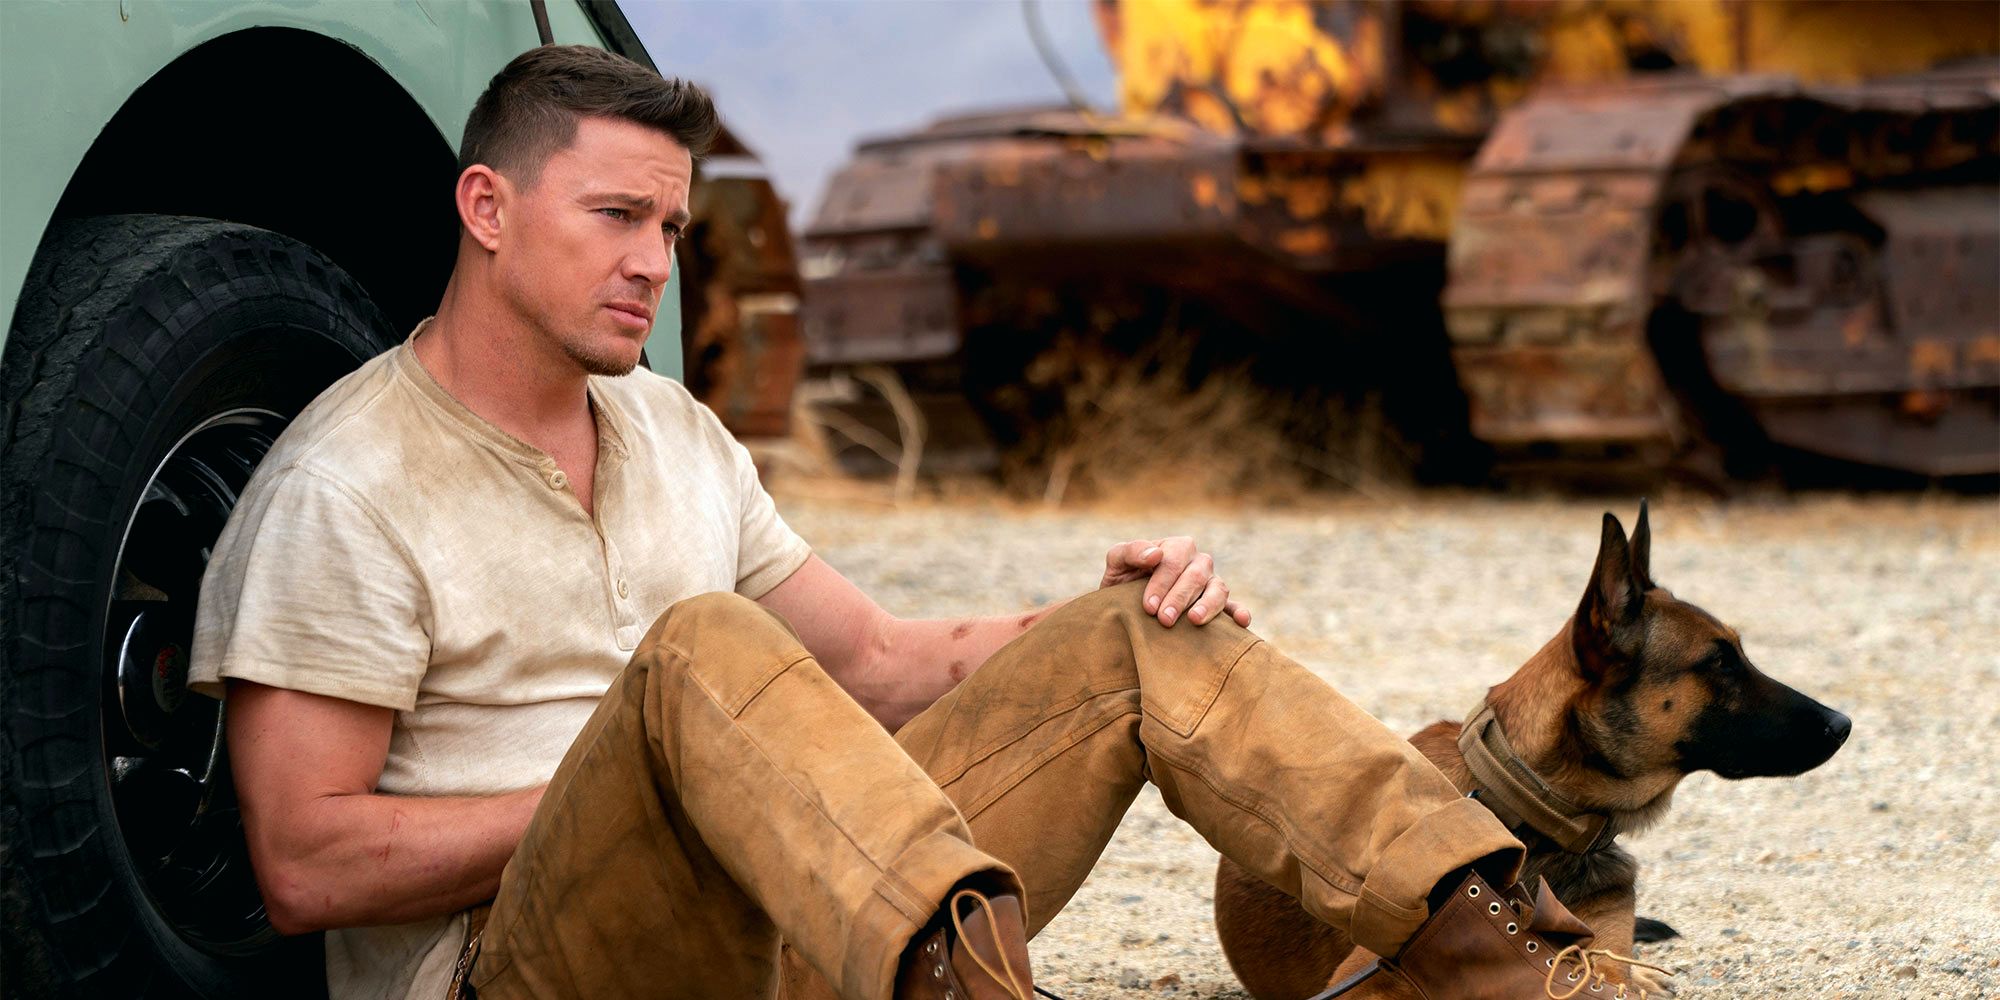 Channing Tatum To Star in Movie Adaptation Of His Own Children’s Book